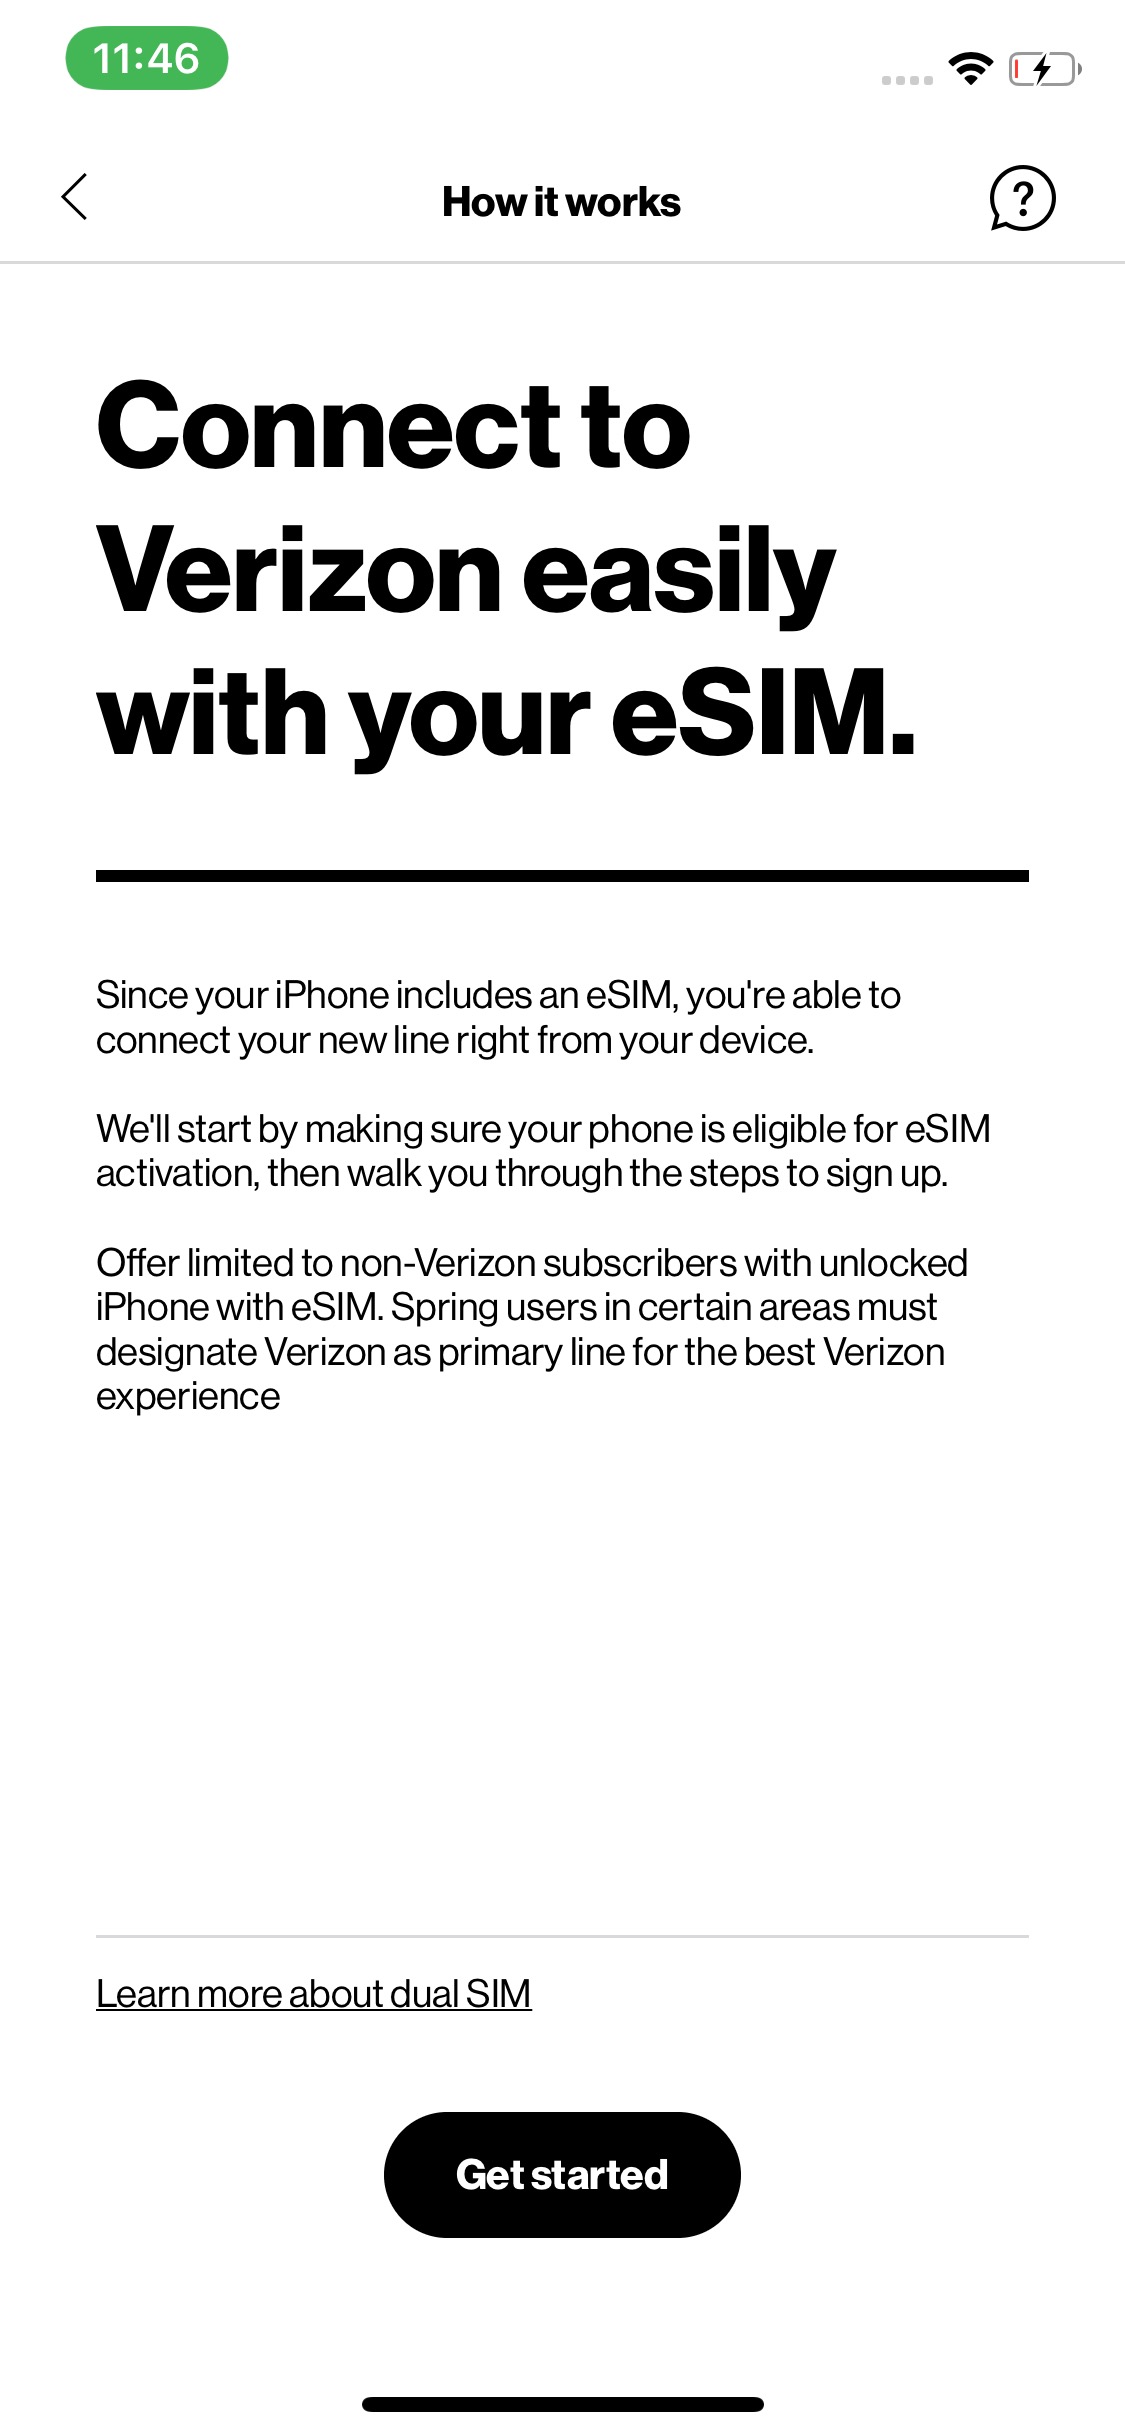 Verizon Launches eSIM Support for iPhone XS, XS Max, XR